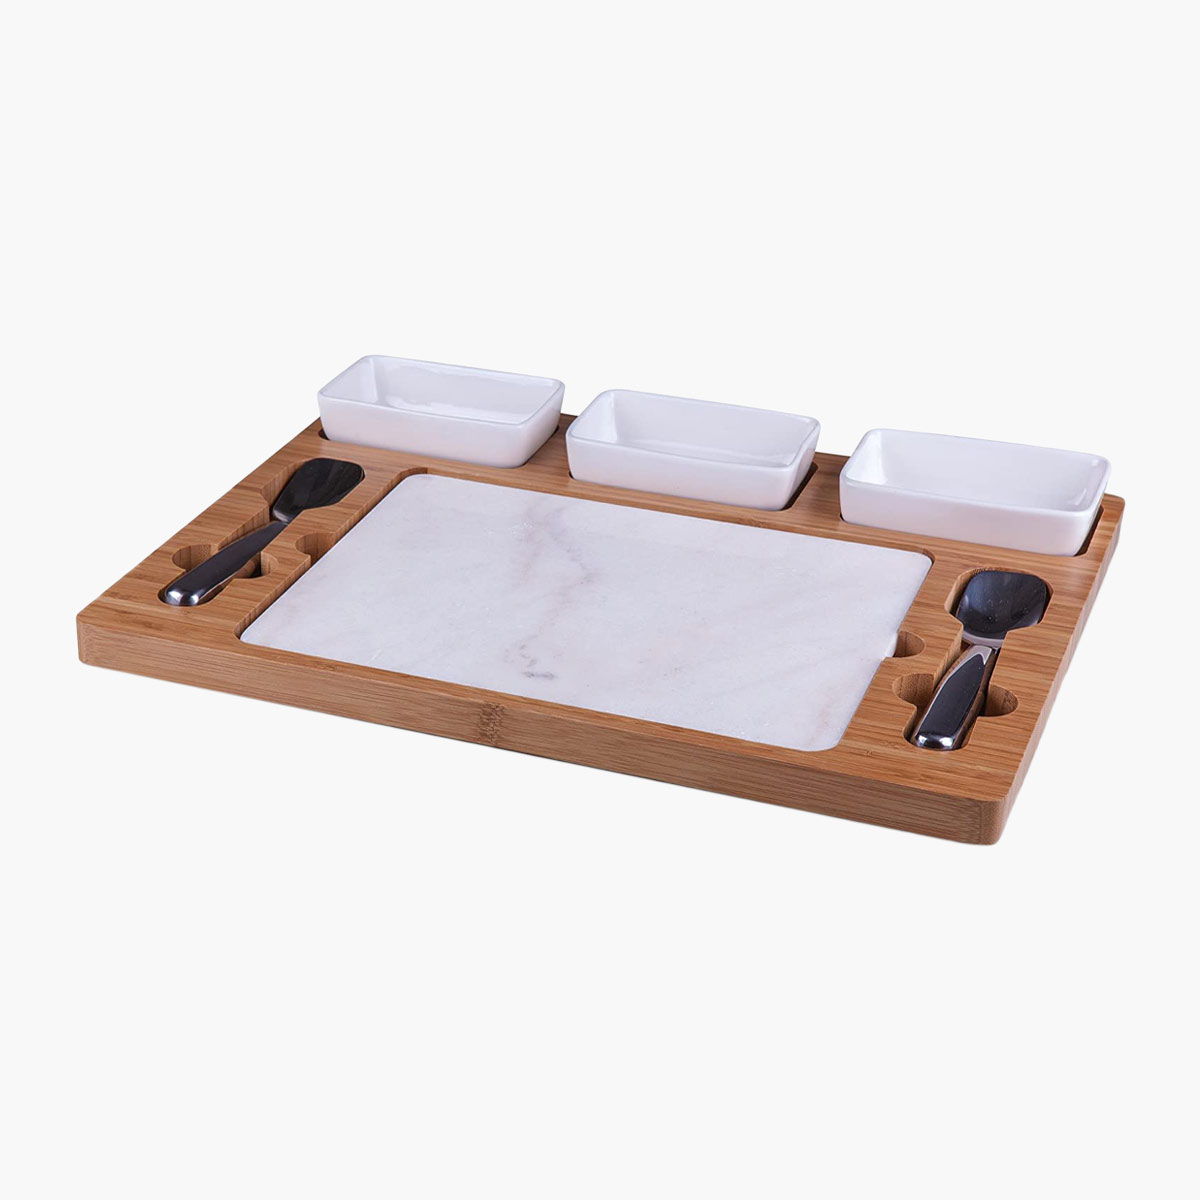 A wooden and marble parlor ice cream mixing set with three bowls, two mixing tools, and a marble slab.